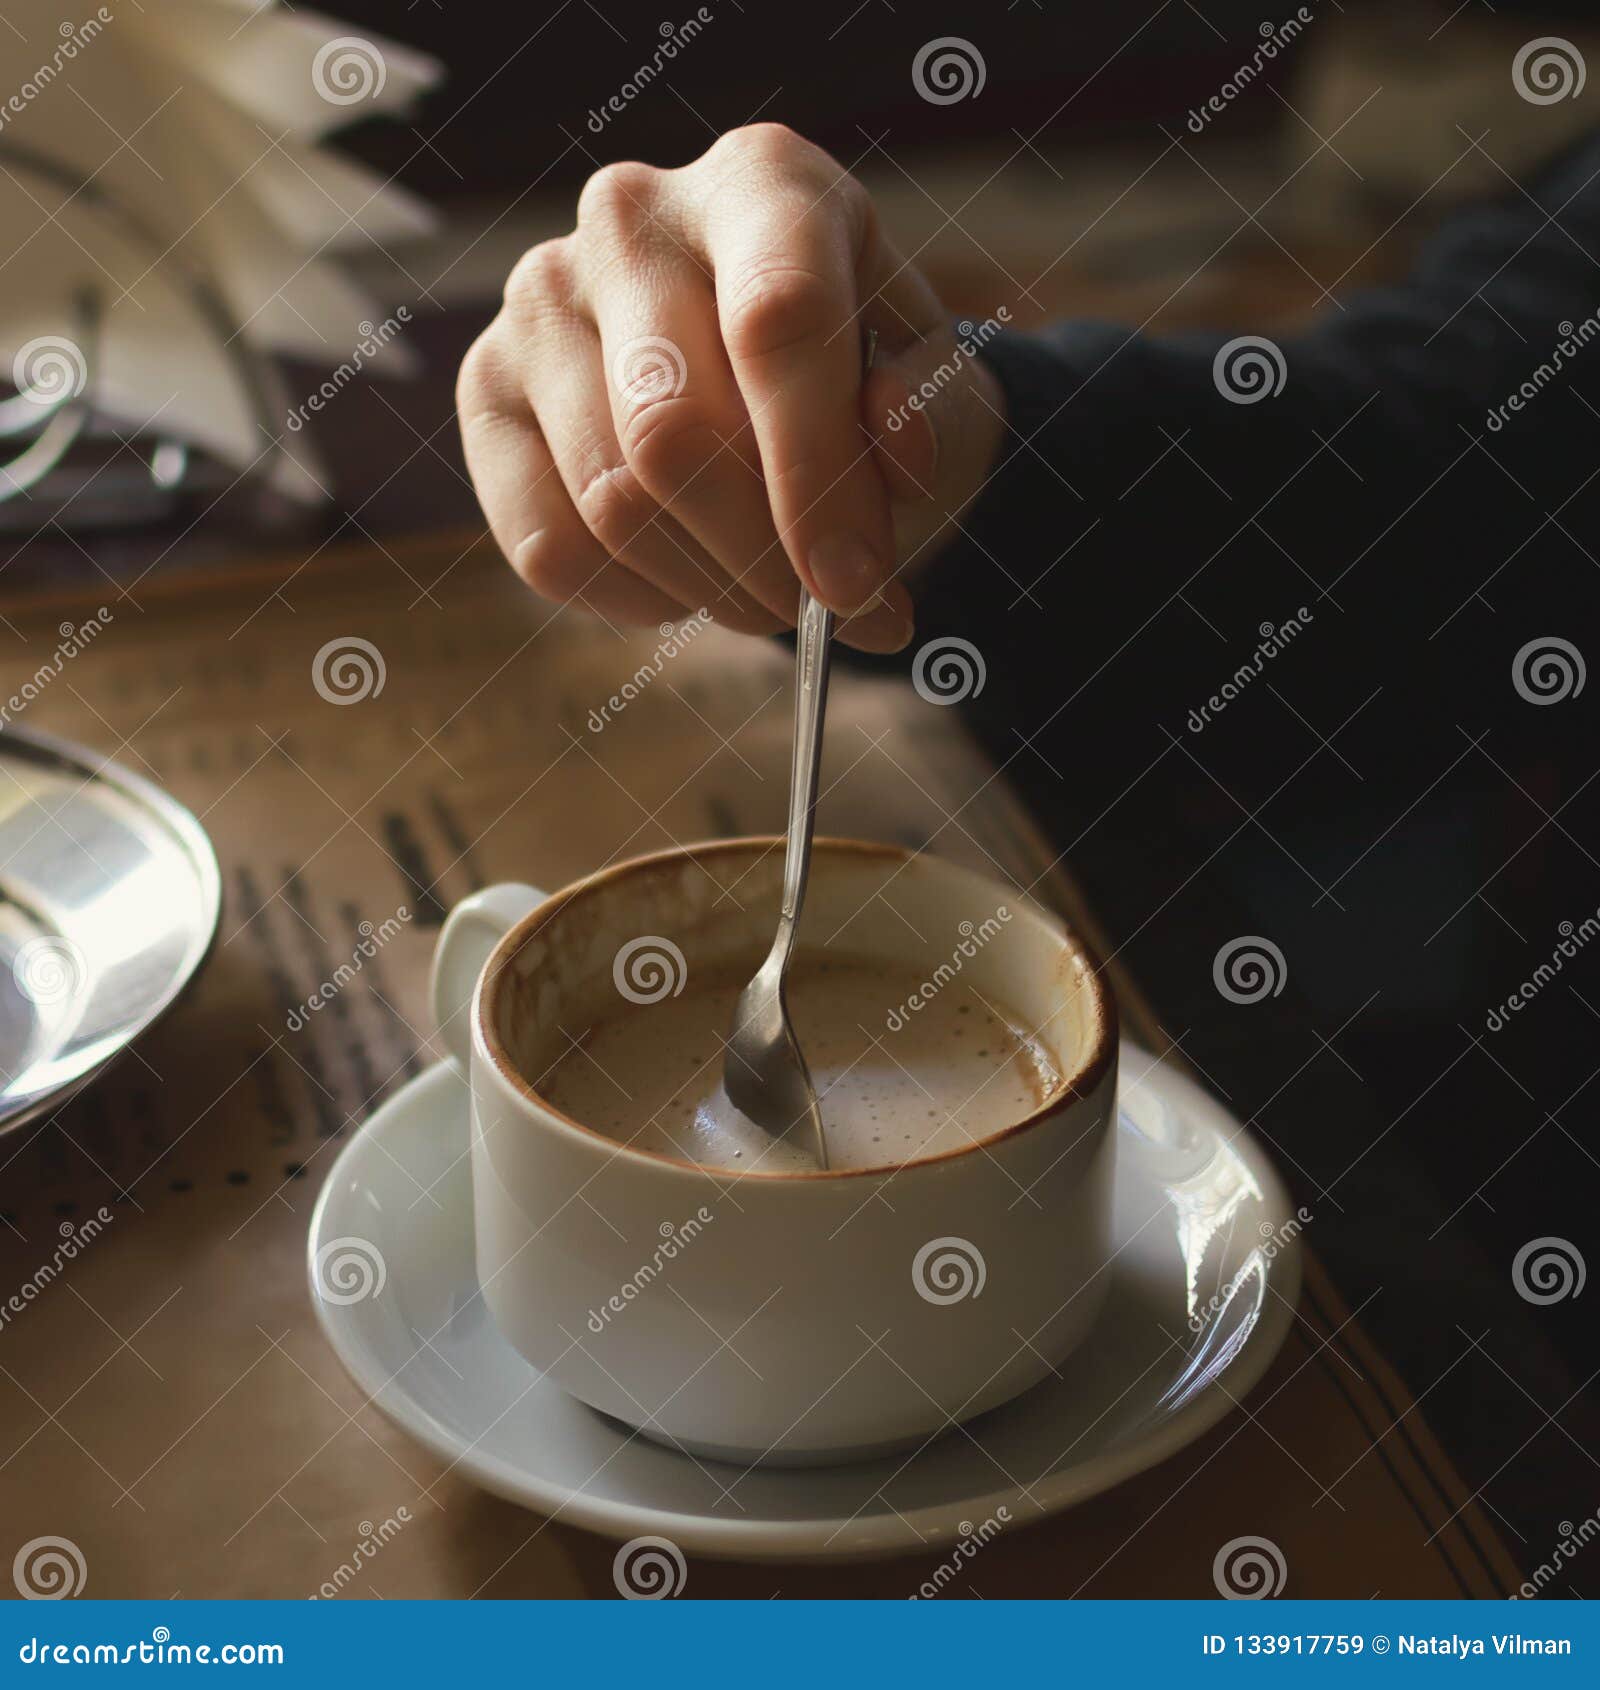 The Girl Stirs Sugar in a Cup of Coffee. Close-up, Lifestyle. Instagram  Style, Square Cropping Stock Image - Image of attractive, drink: 133917759